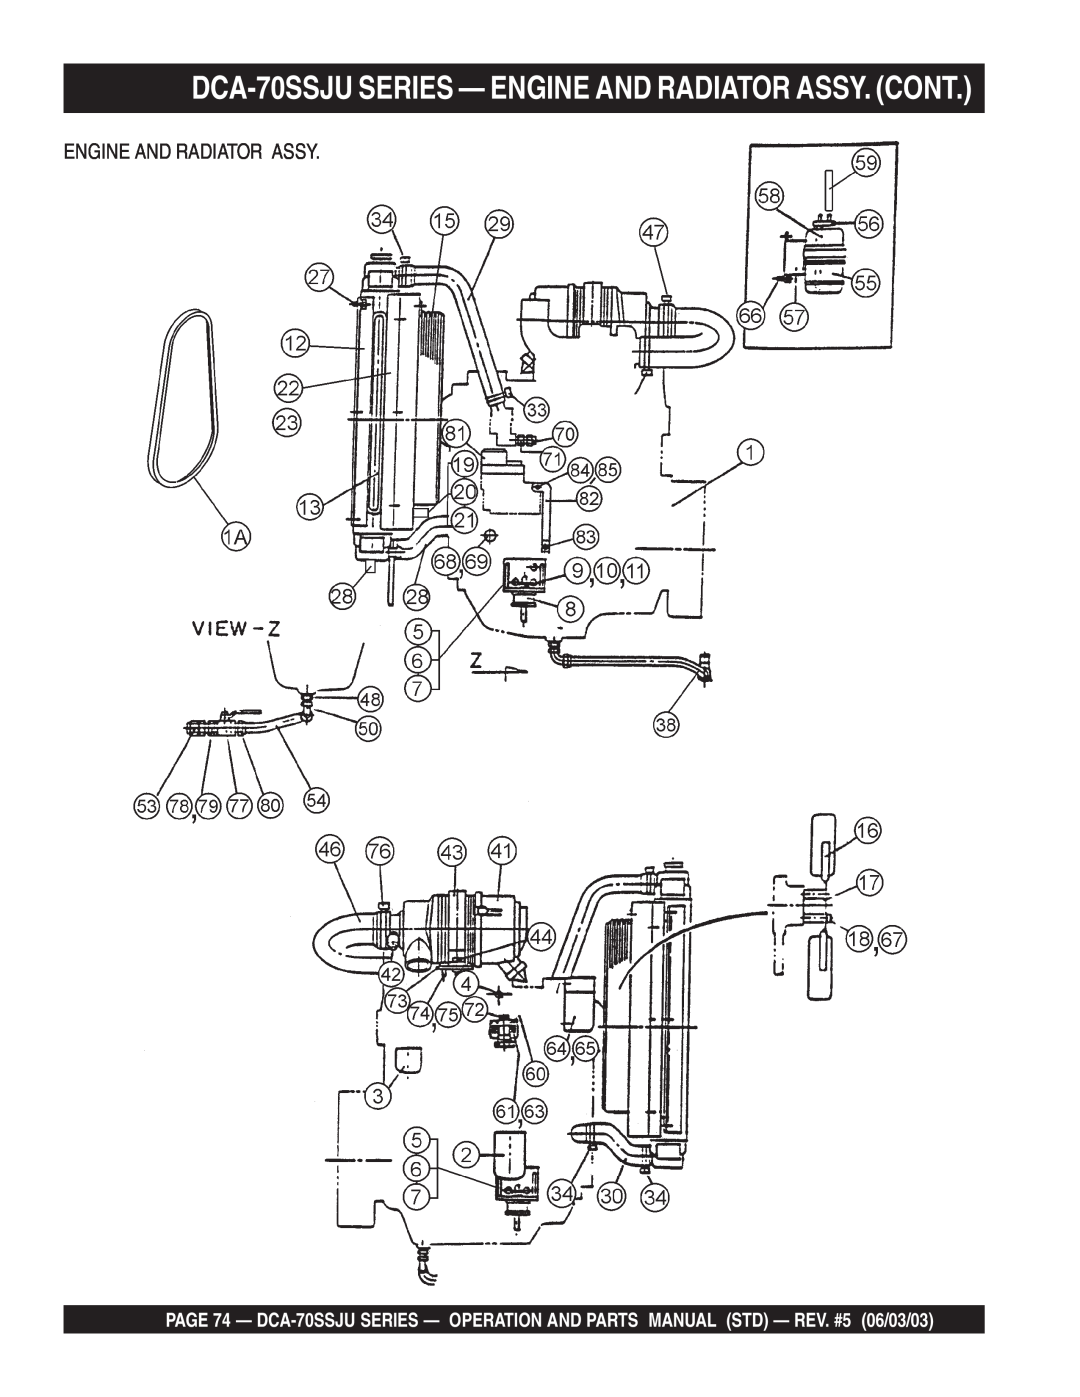 Multiquip operation manual DCA-70SSJUSERIES — ENGINE AND RADIATOR ASSY. CONT 